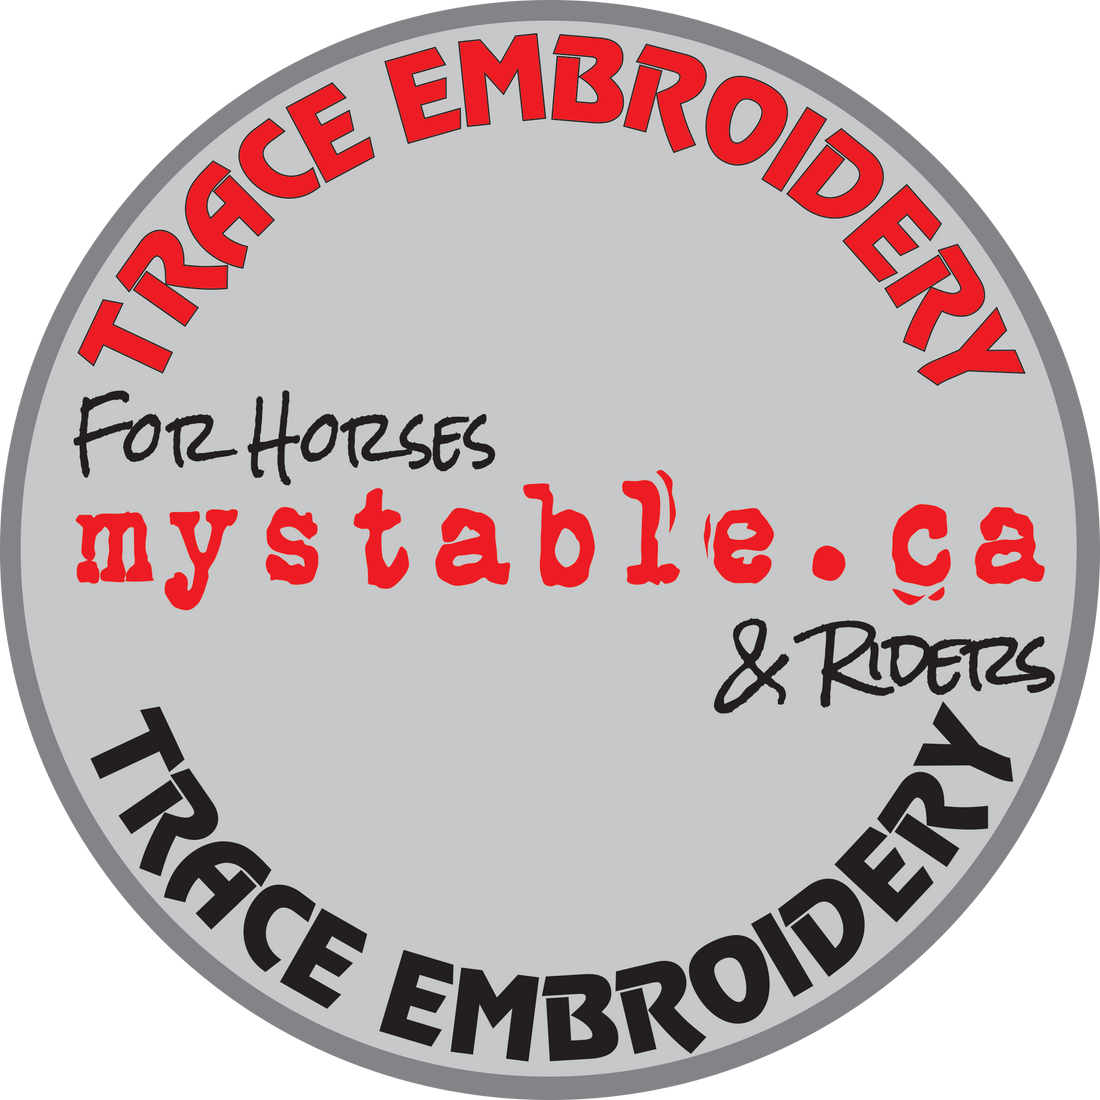 Trace Embroidery / My Stable.ca